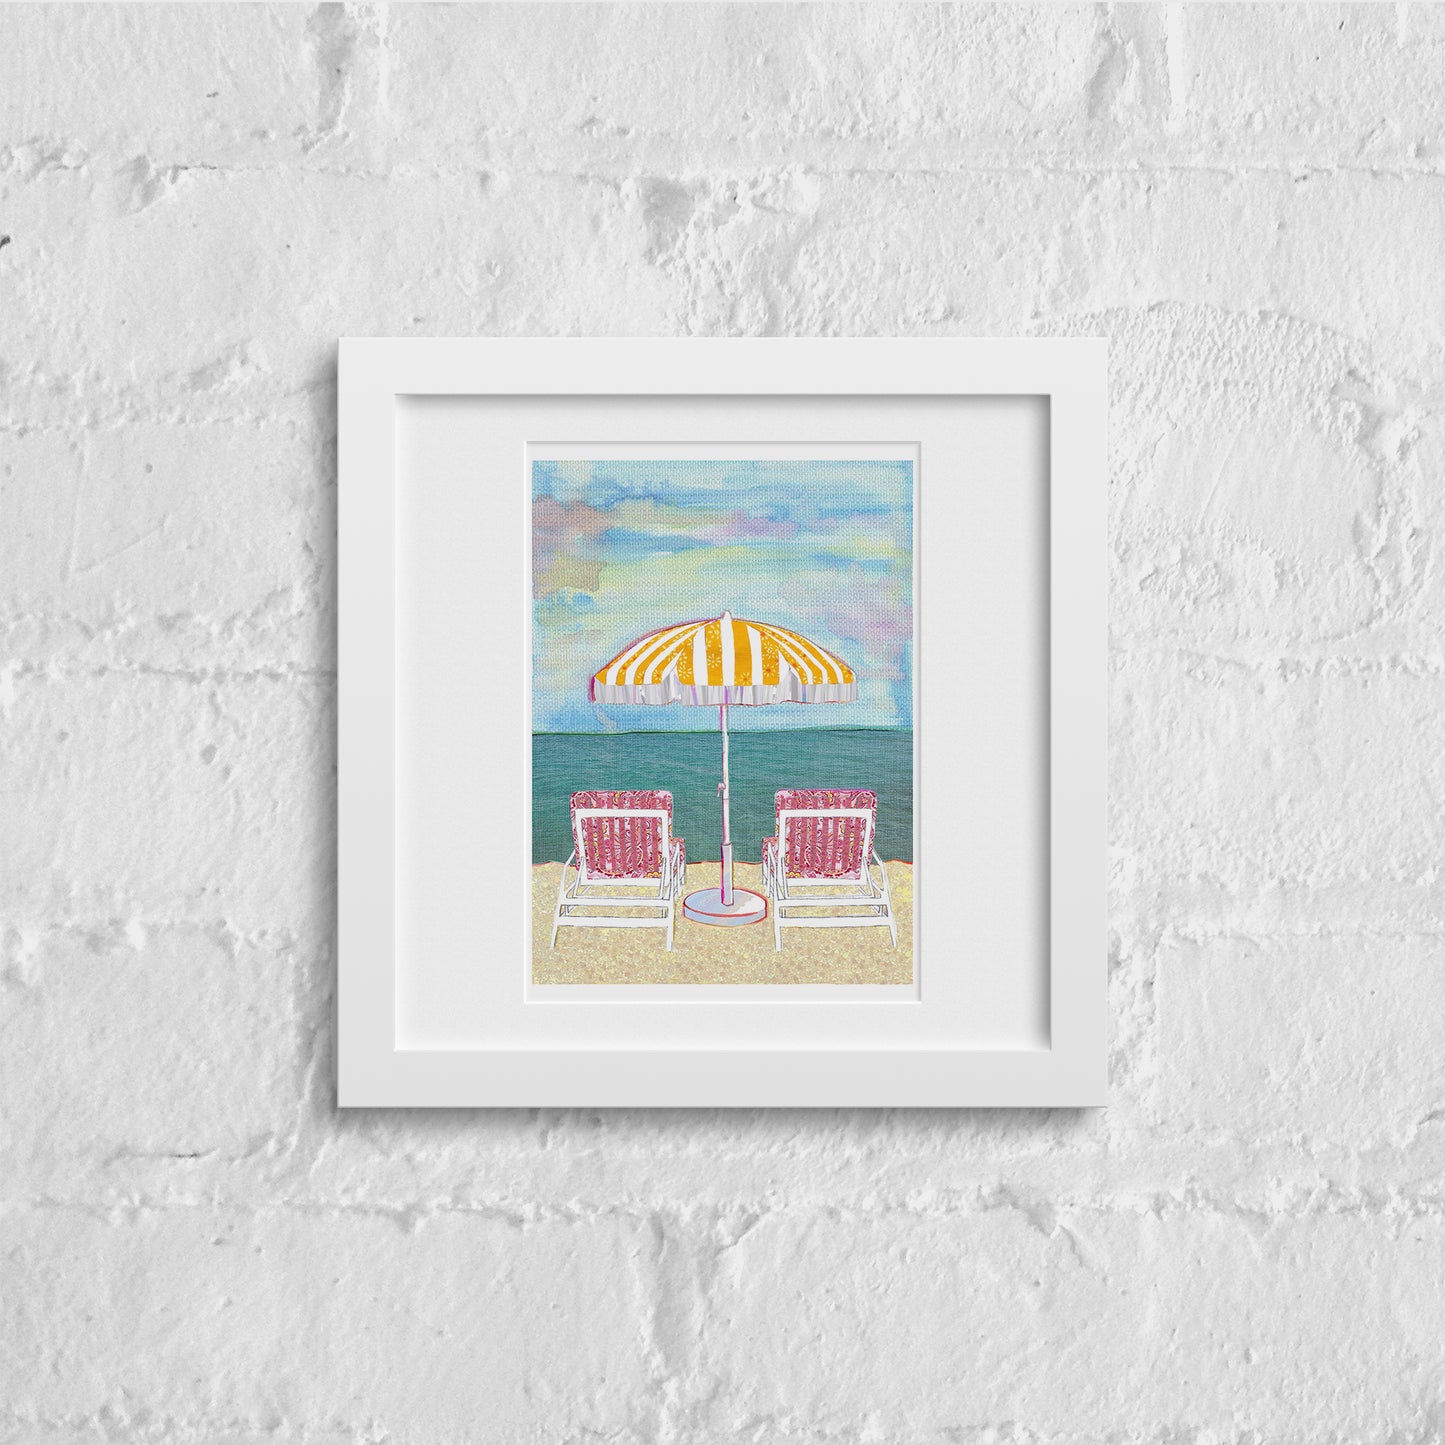 White wall with a white framed illustration of a pretty pastel beach scene featuring 2 chairs and a parasol by the sea